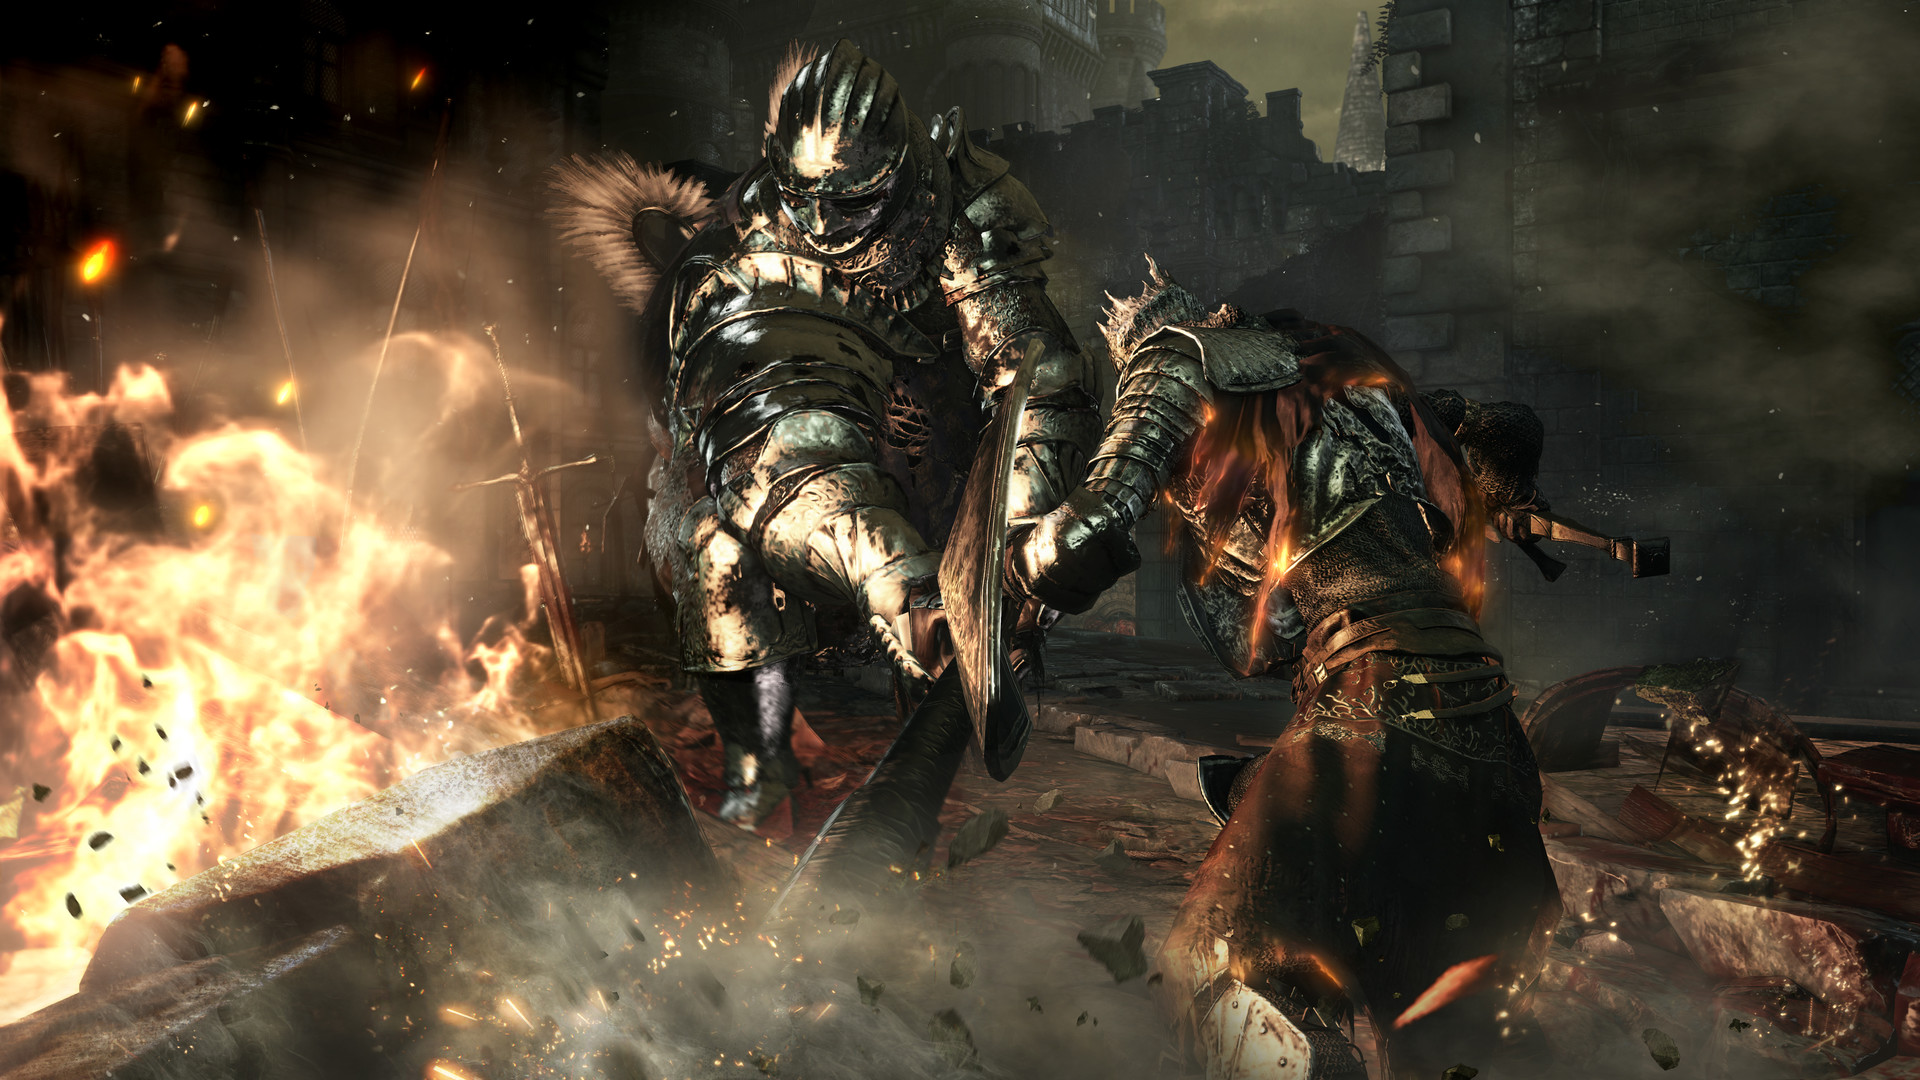 Best Game of Thrones games: Dark Souls 3. Image shows a person a fiery battleground.